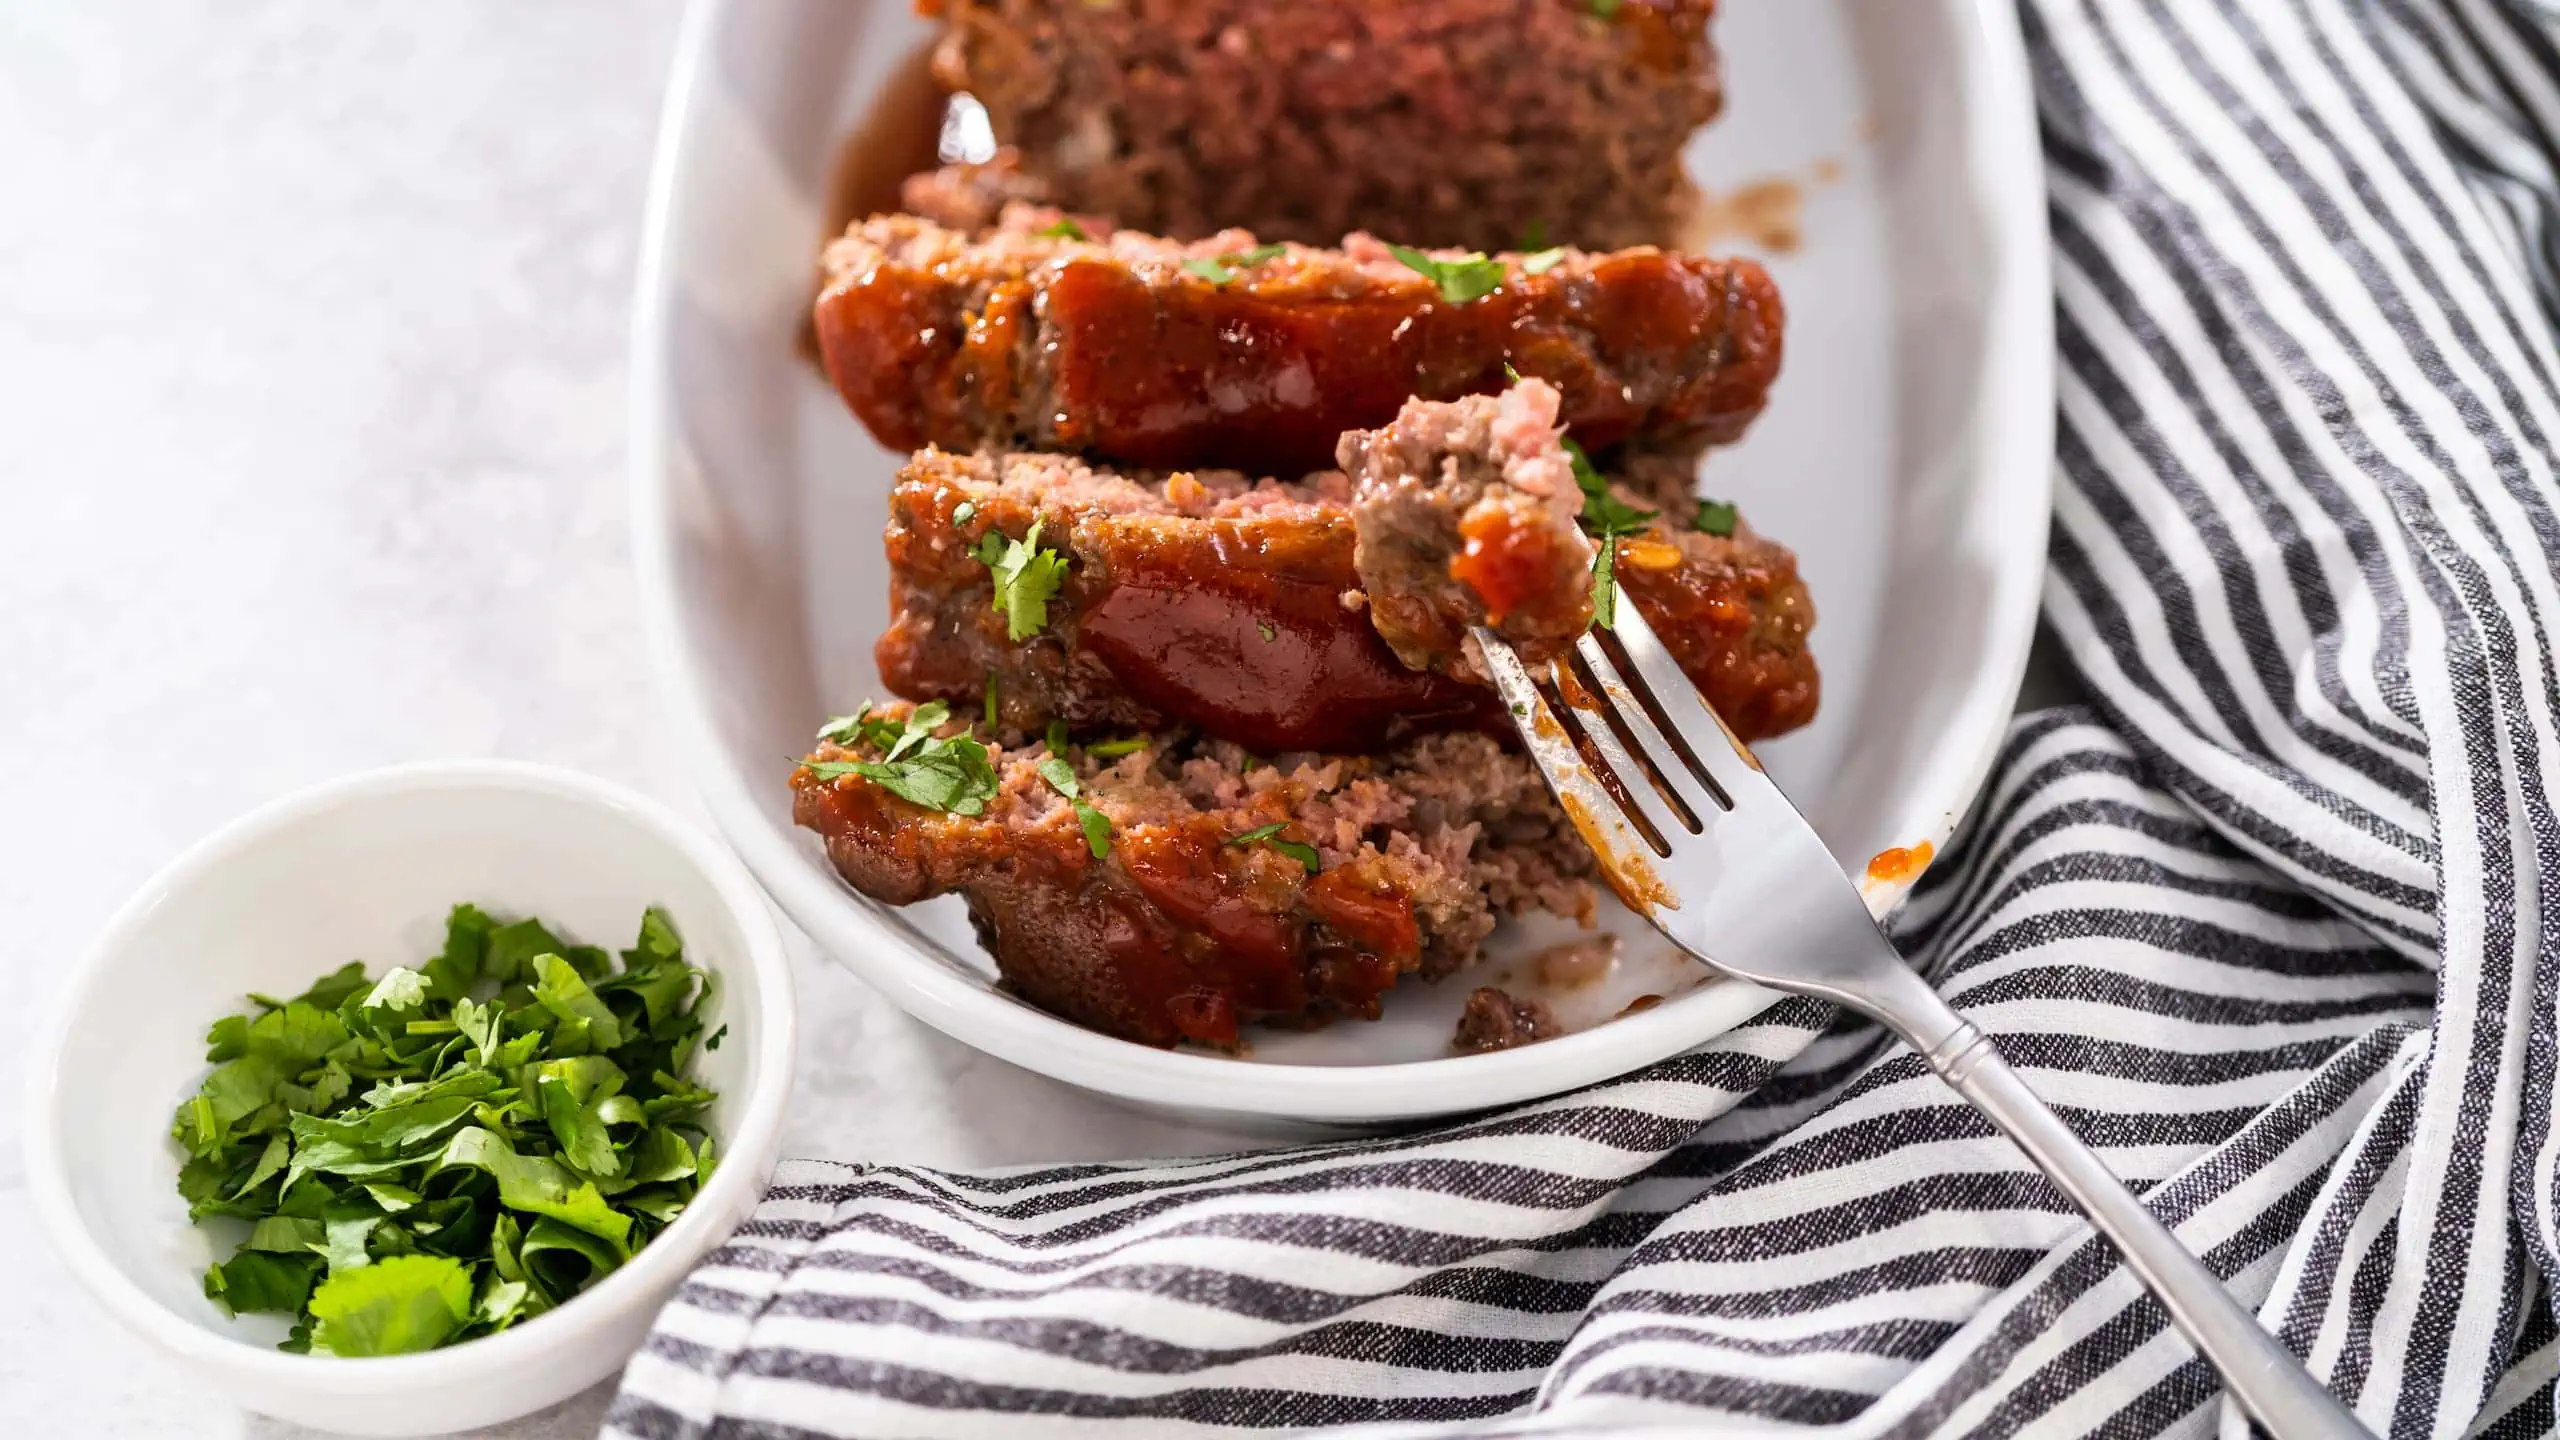 Our homemade Golden Corral meatloaf  with fresh parsley